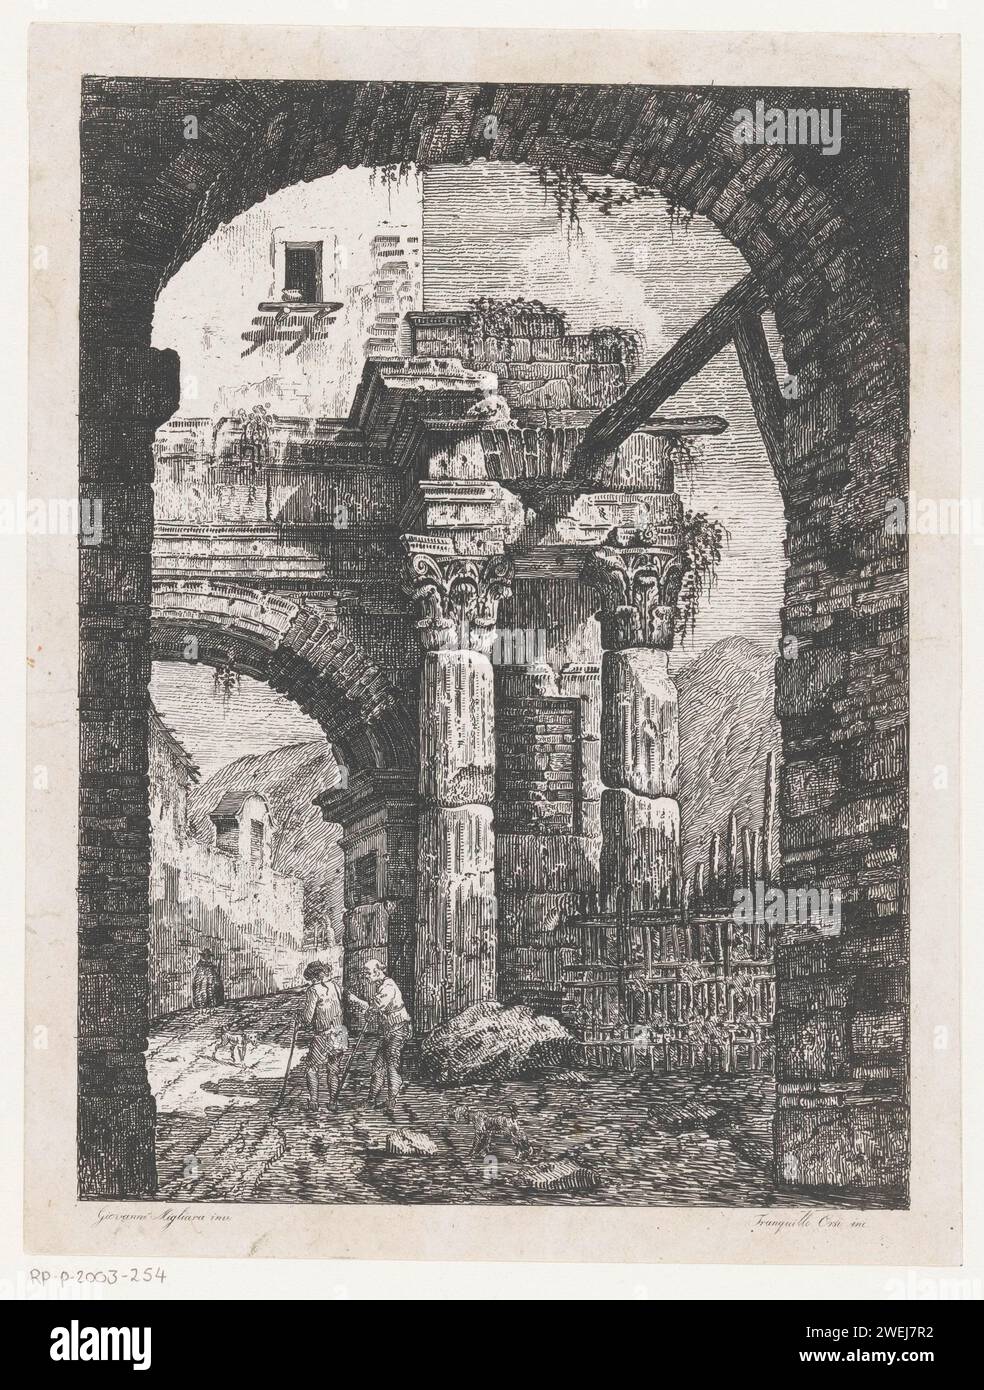 Antique ruins and walkers on a path, Tranquillo Orsi, after Giovanni Migliara, 1795 - c. 1845 print Ruin of an antique gate with Corinthian columns. On the path that runs under the gate, two hikers with two dogs. A mountainous landscape in the background. The whole is framed by a second port in the foreground.  paper etching landscape with ruins. 'en route', traveller under way. Corinthian order  architecture Stock Photo